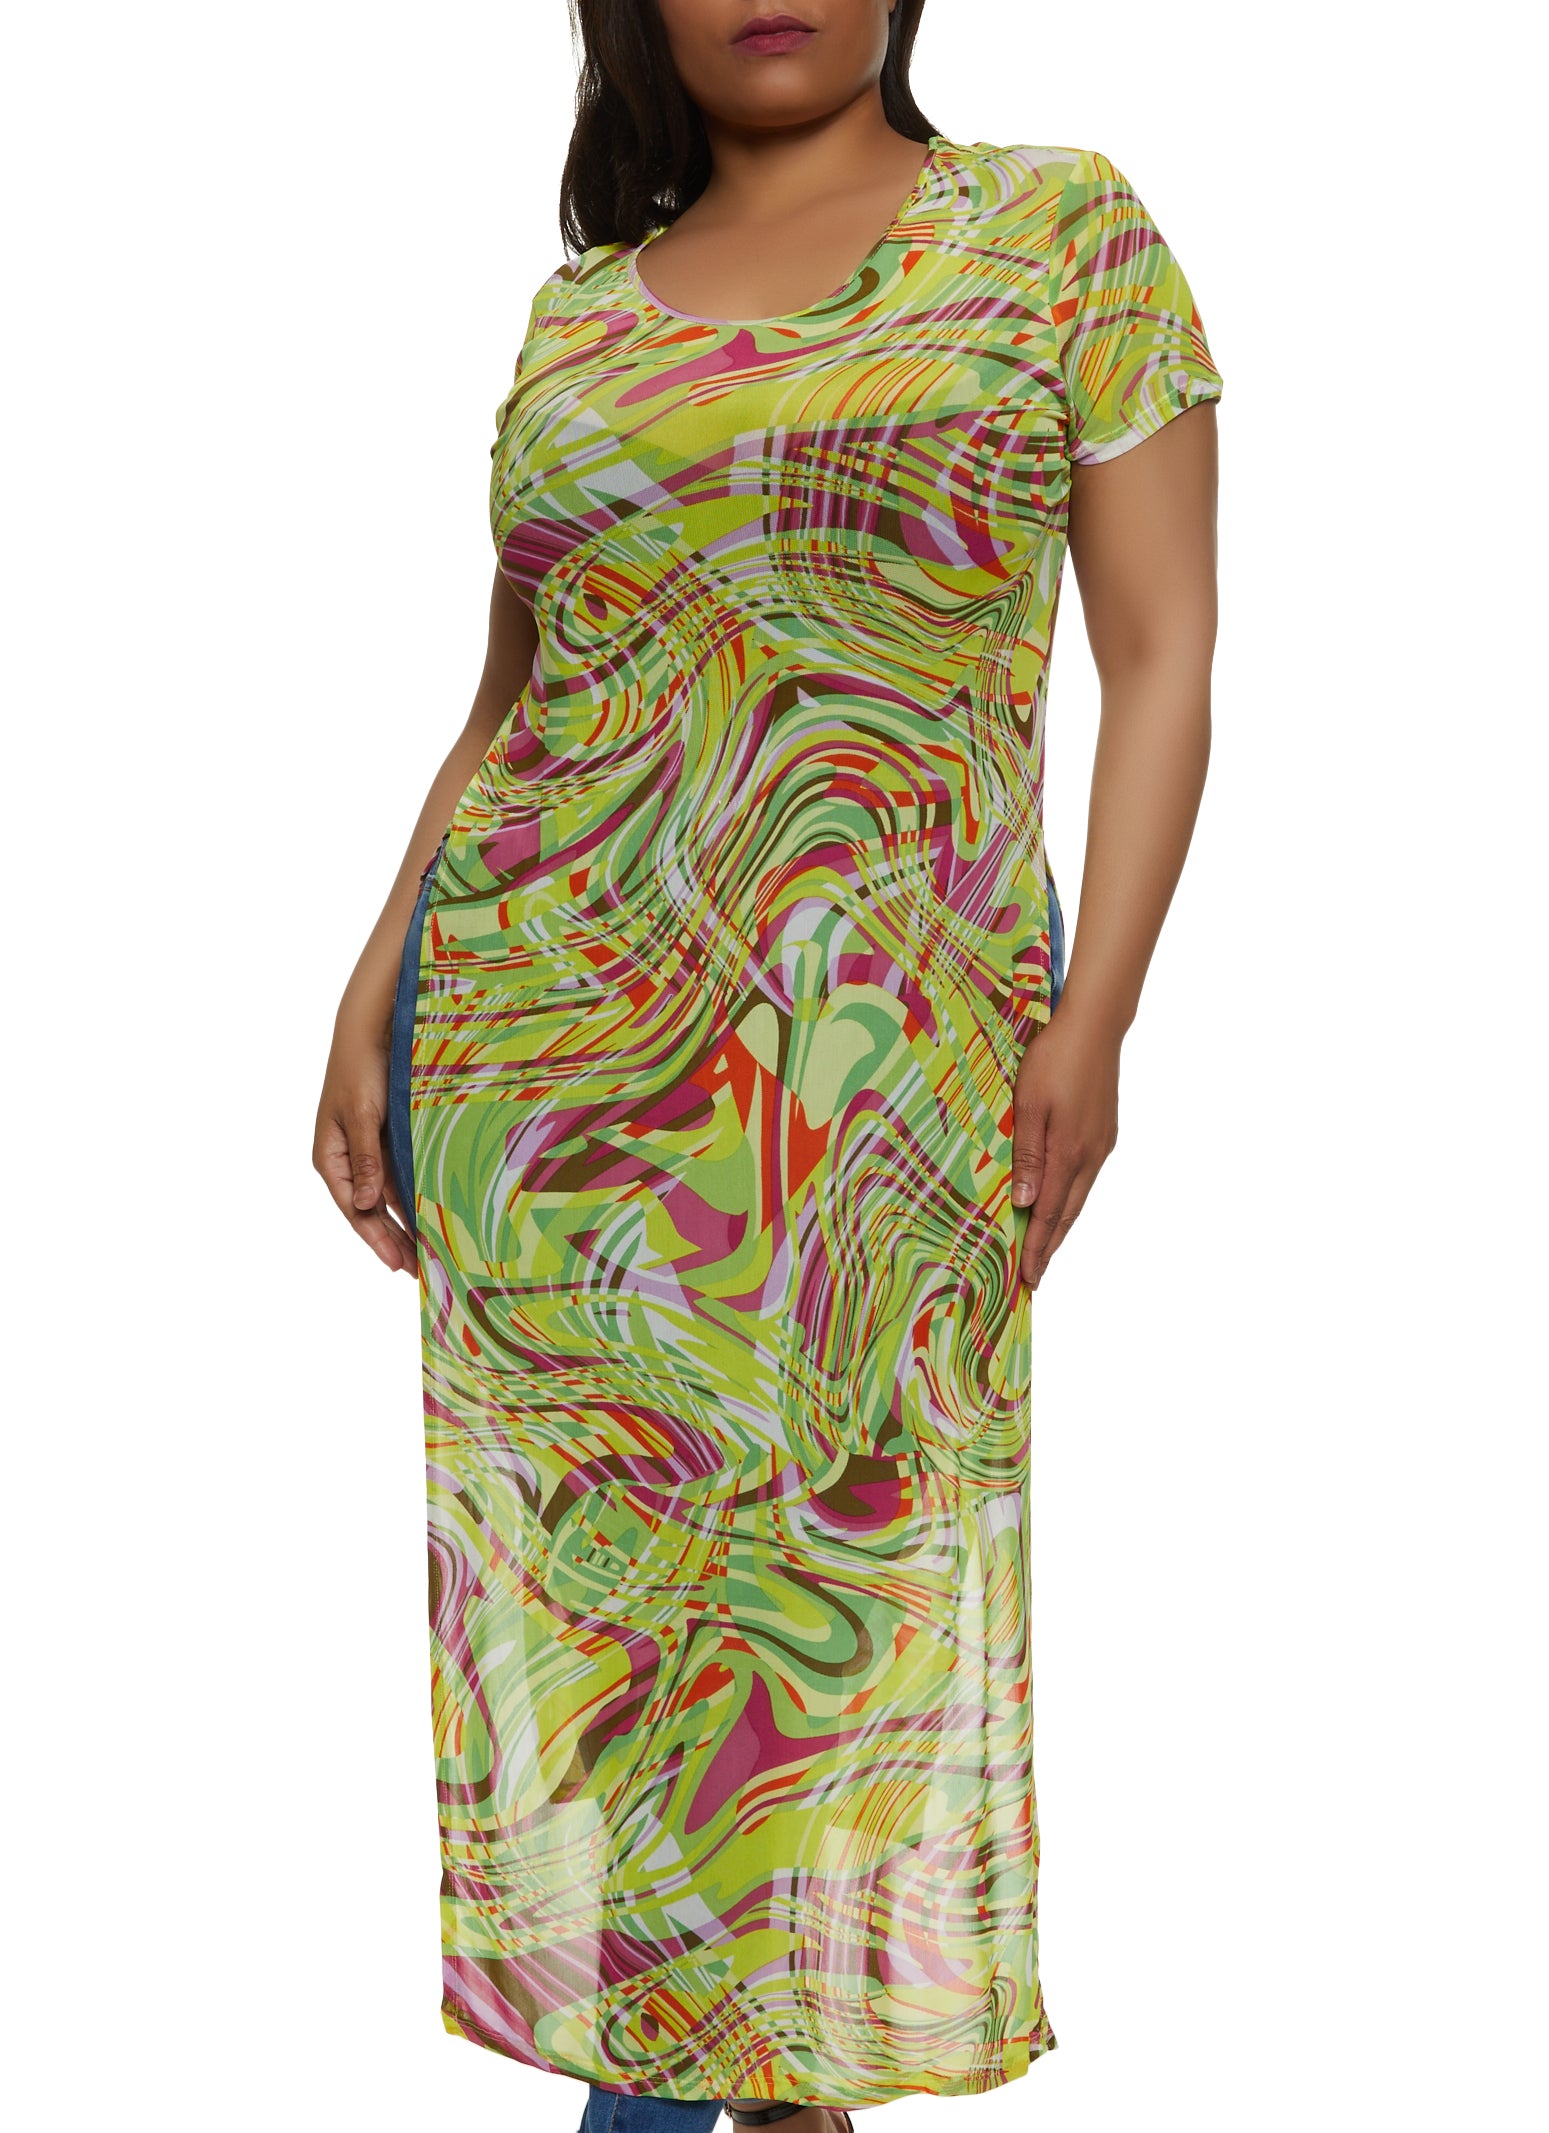 Plus Size Mesh Psychedelic Print Maxi Top